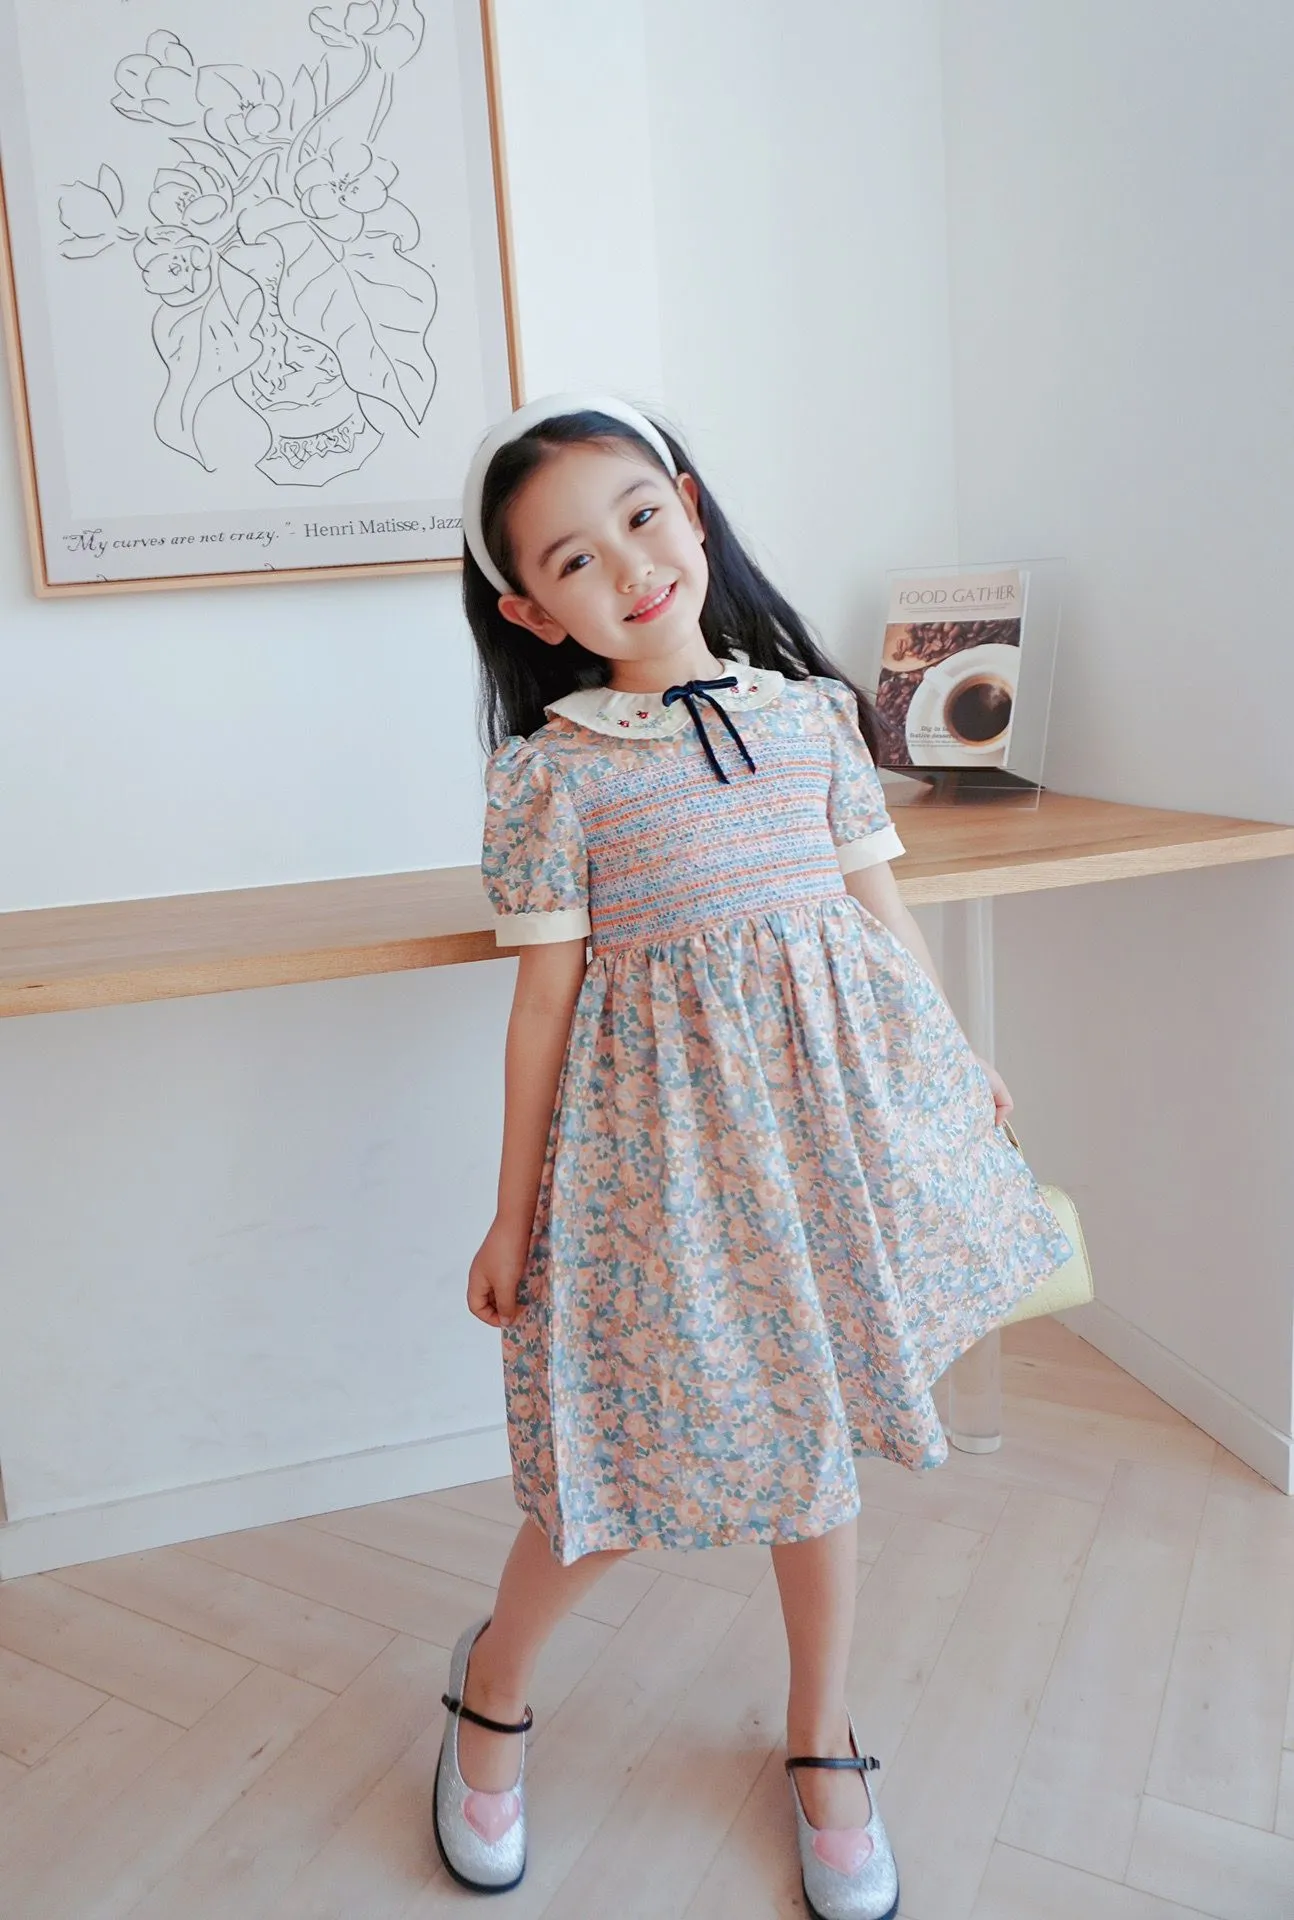 Sweet Pink Cotton Baby Dress For Girls High Quality Summer Outfit